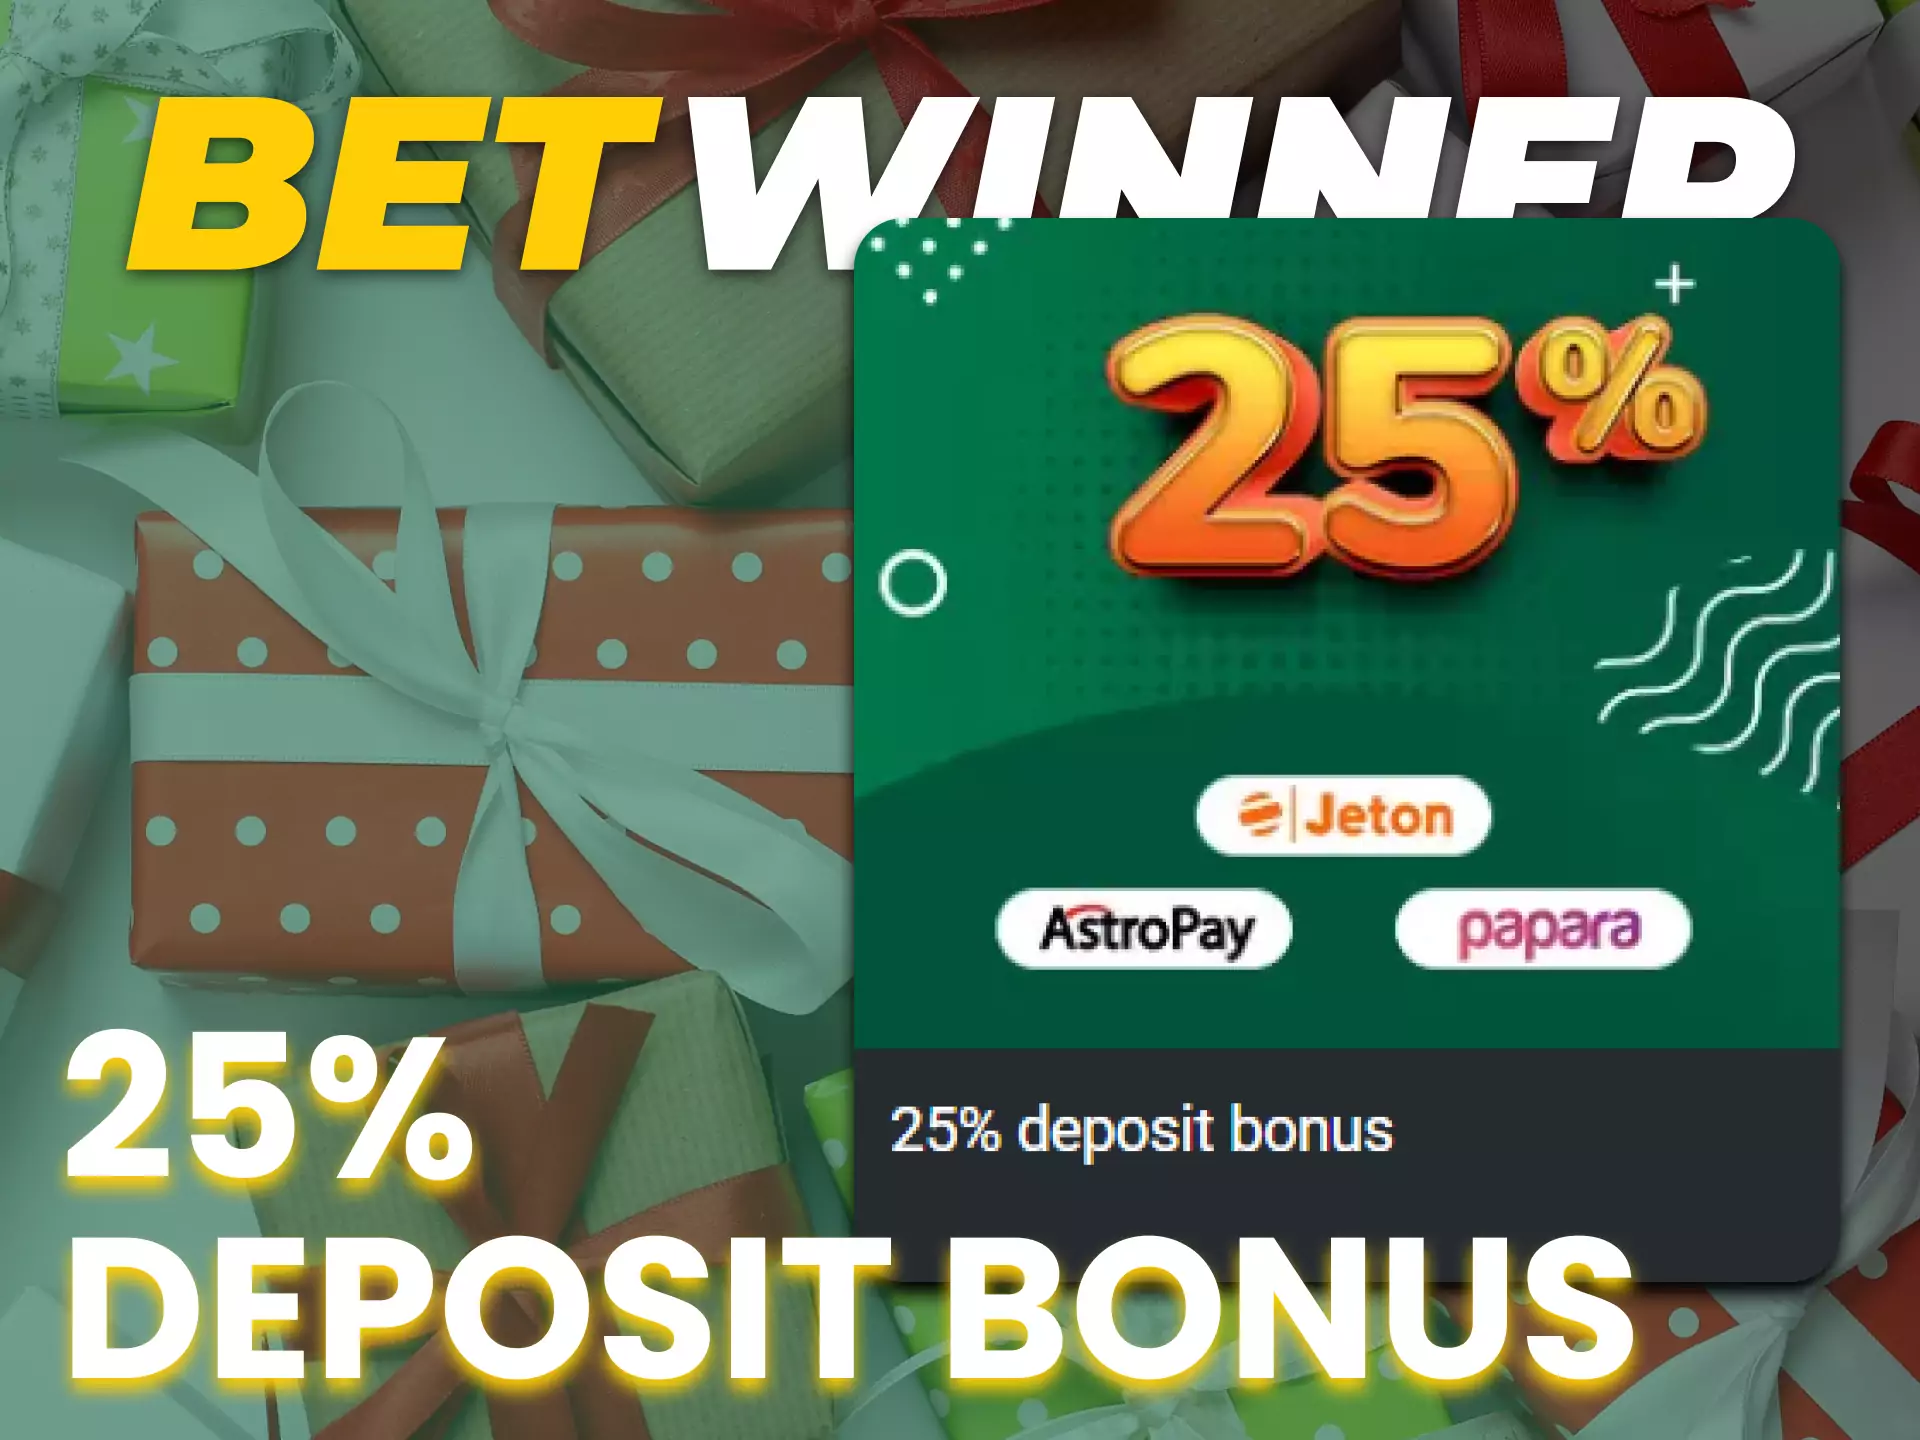 In the Betwinner app you can get a special bonus on your deposit.